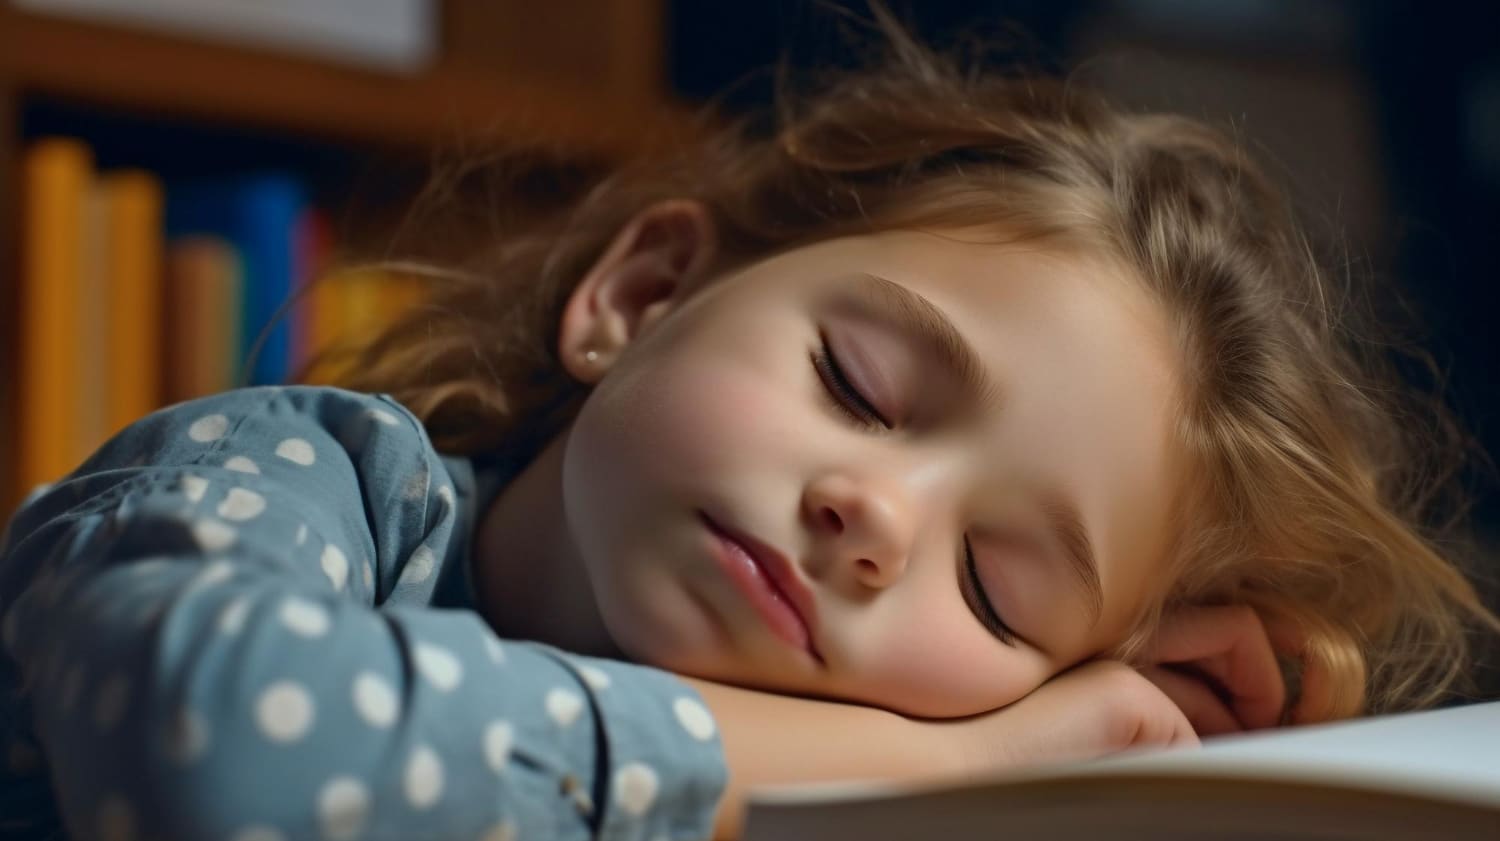 Does My Child Have ADHD or a Sleep Disorder?